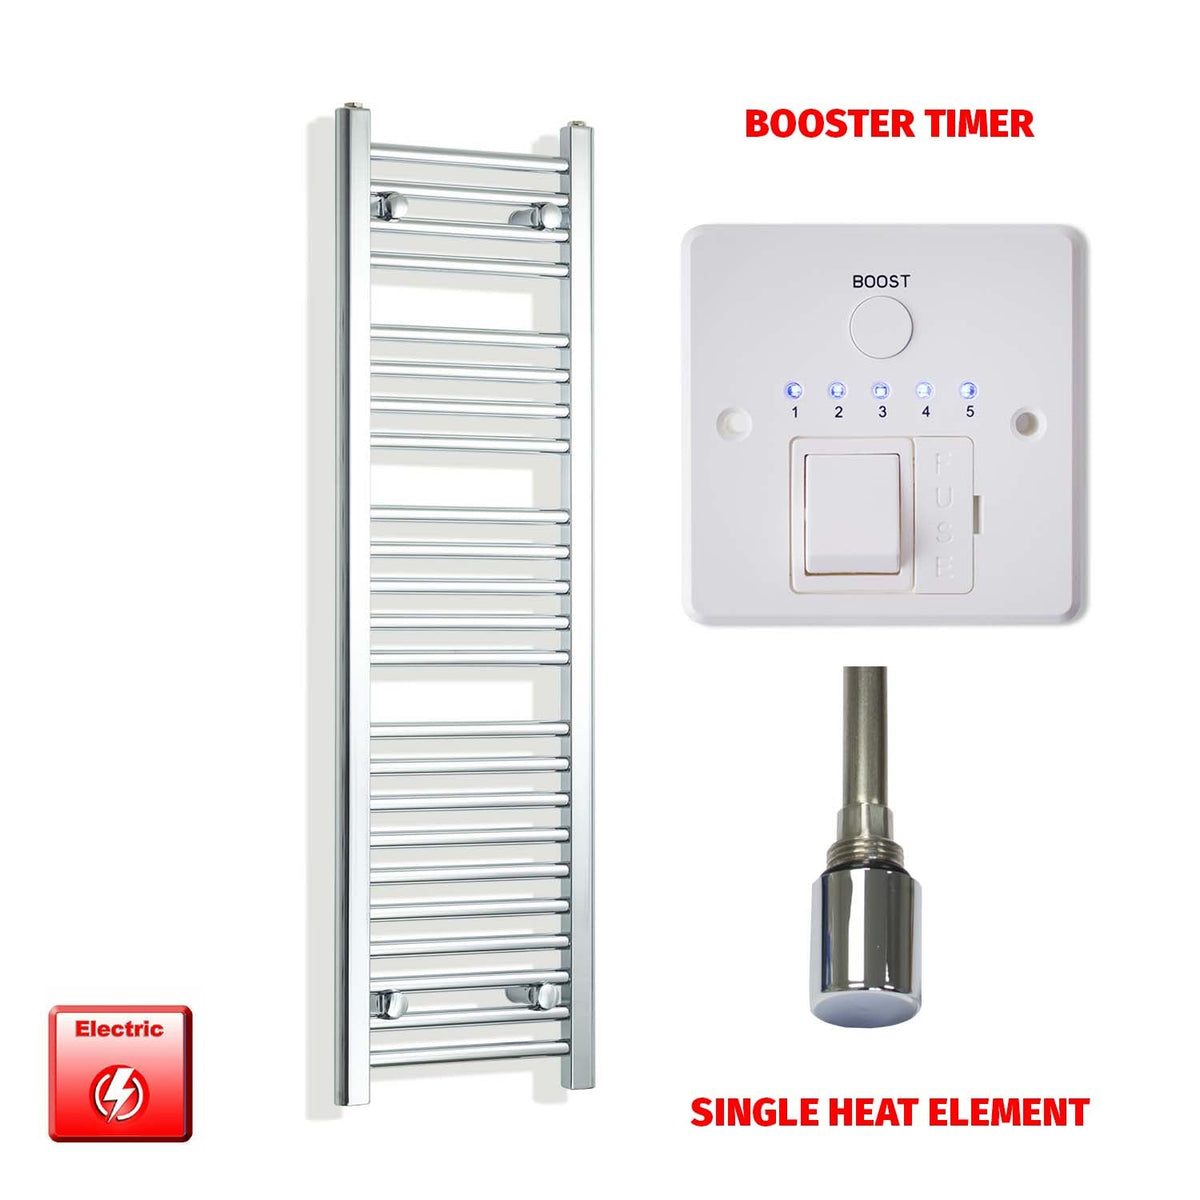 1400mm High 350mm Wide Pre-Filled Electric Heated Towel Rail Radiator Straight Chrome Single heat element Booster timer